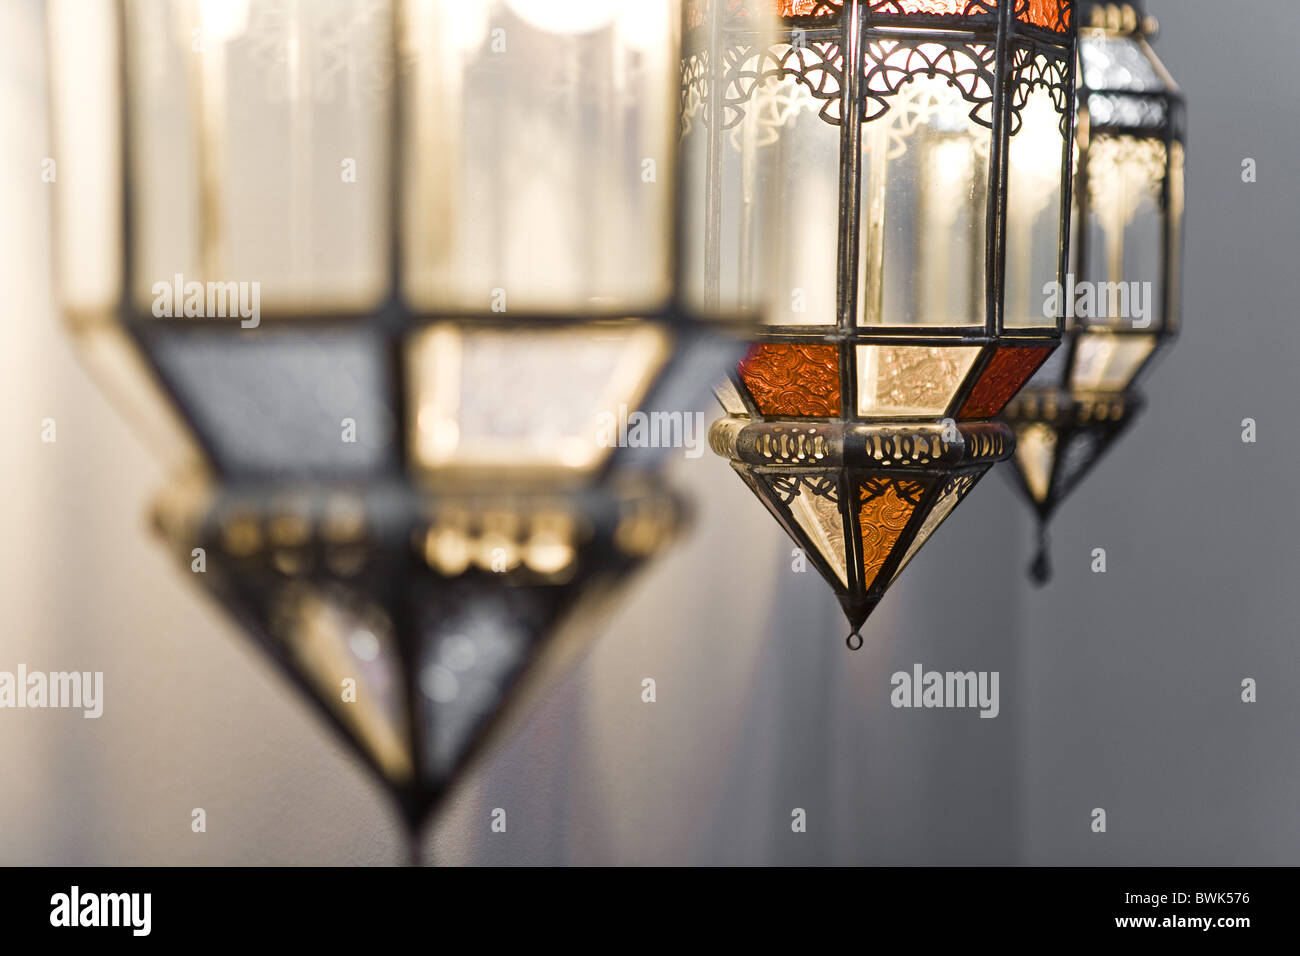 Detail of Moroccan lamps, Marrakech, Morocco, Afrika Stock Photo - Alamy